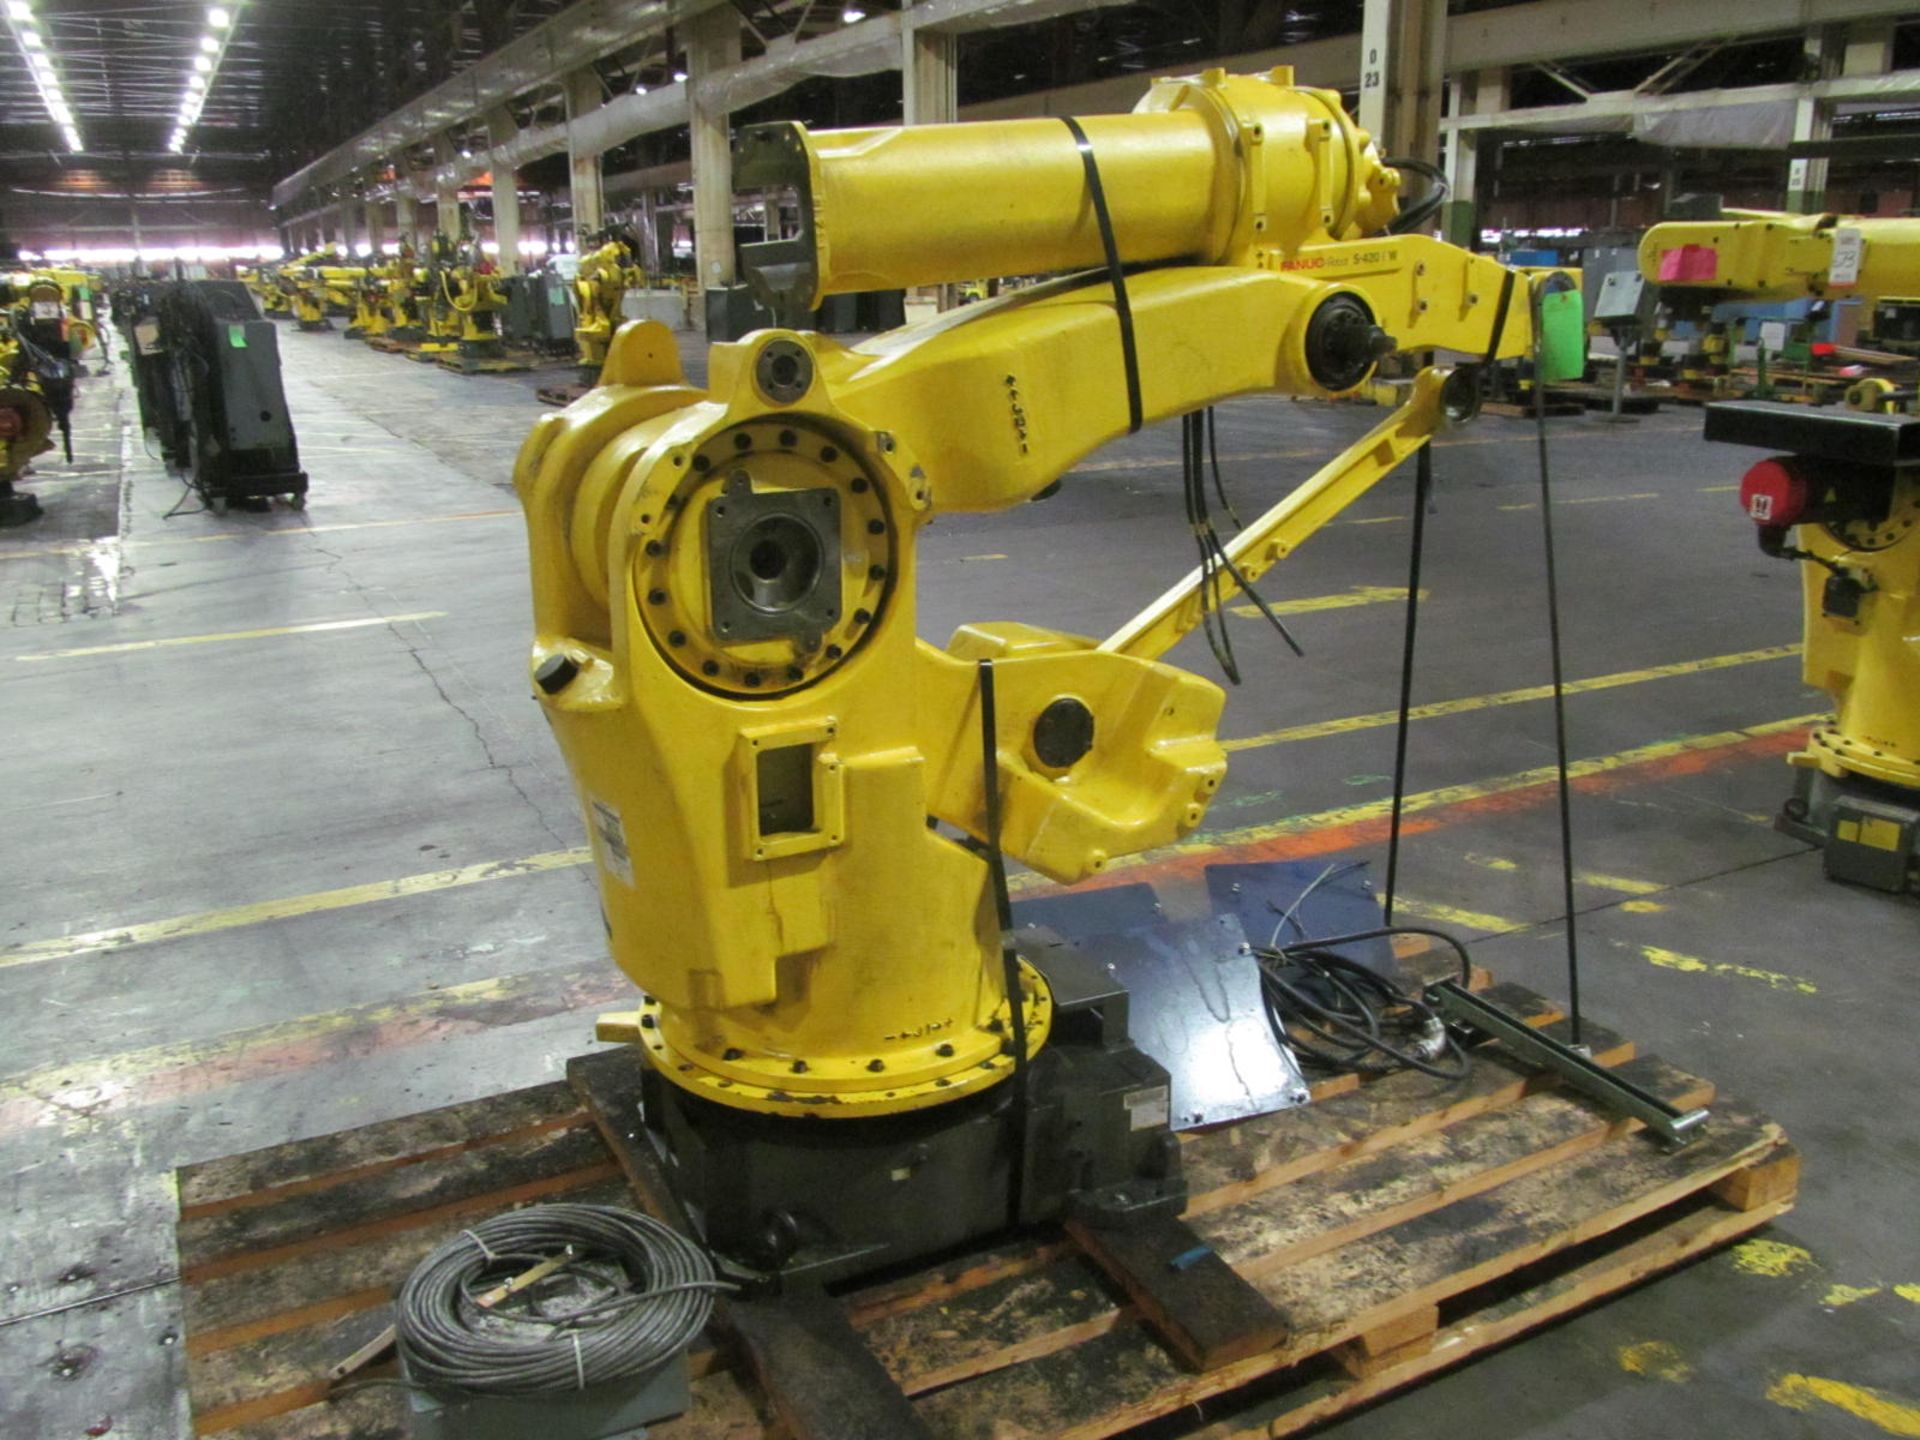 6-AXIS FANUC S420iW ROBOT, S/N R99203632 (1999), TYPE A05B-1313-B503, F-40163, (LOC.-P23) - Image 2 of 2